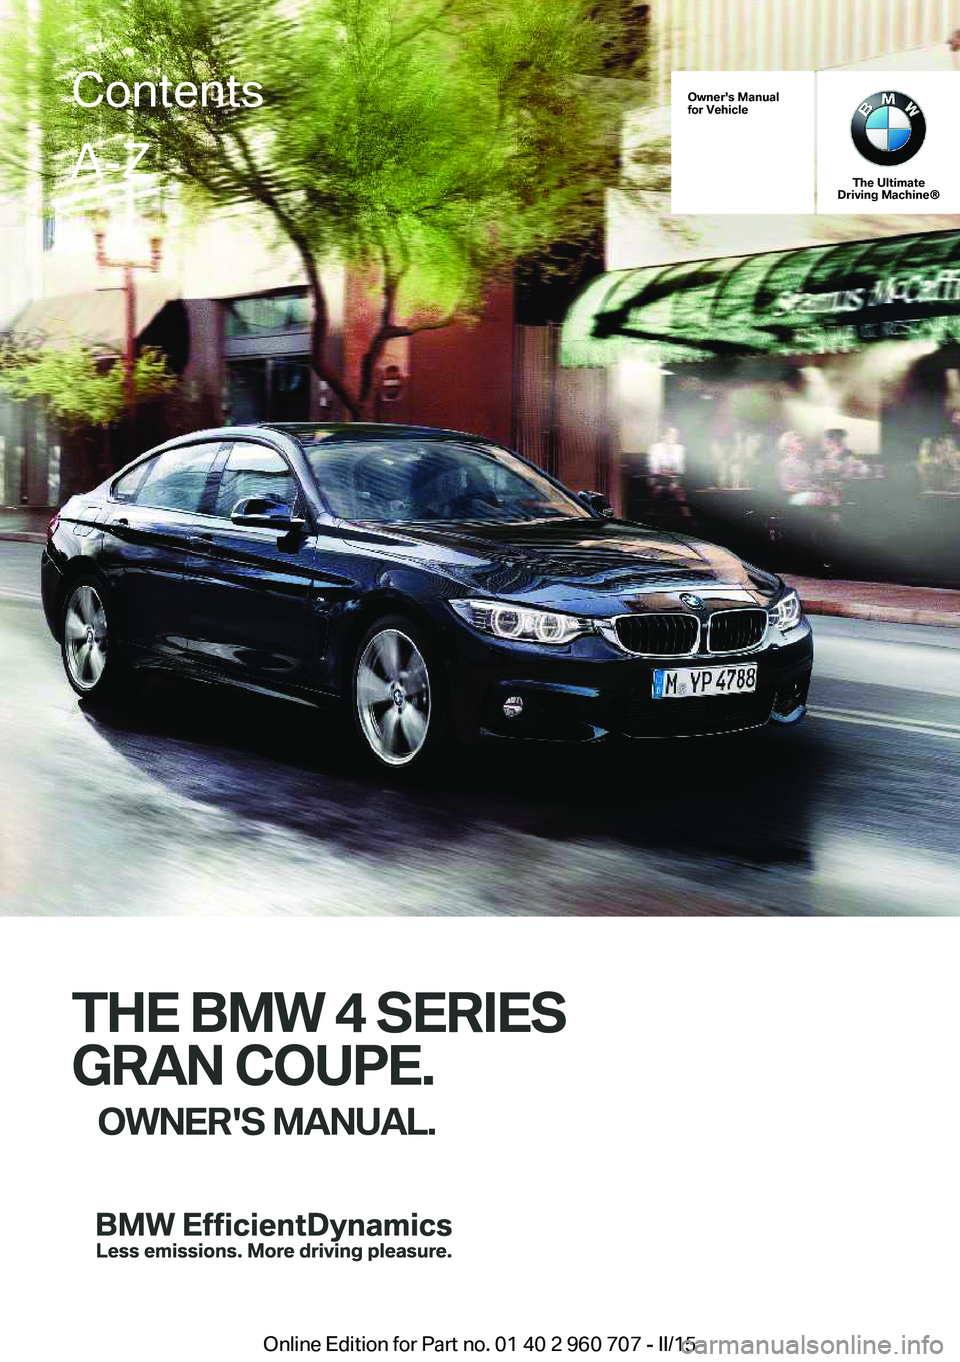 BMW 428I GRAN COUPE 2015  Owners Manual Owner's Manual
for Vehicle
The Ultimate
Driving Machine®
THE BMW 4 SERIES
GRAN COUPE. OWNER'S MANUAL.
ContentsA-Z
Online Edition for Part no. 01 40 2 960 707 - II/15   